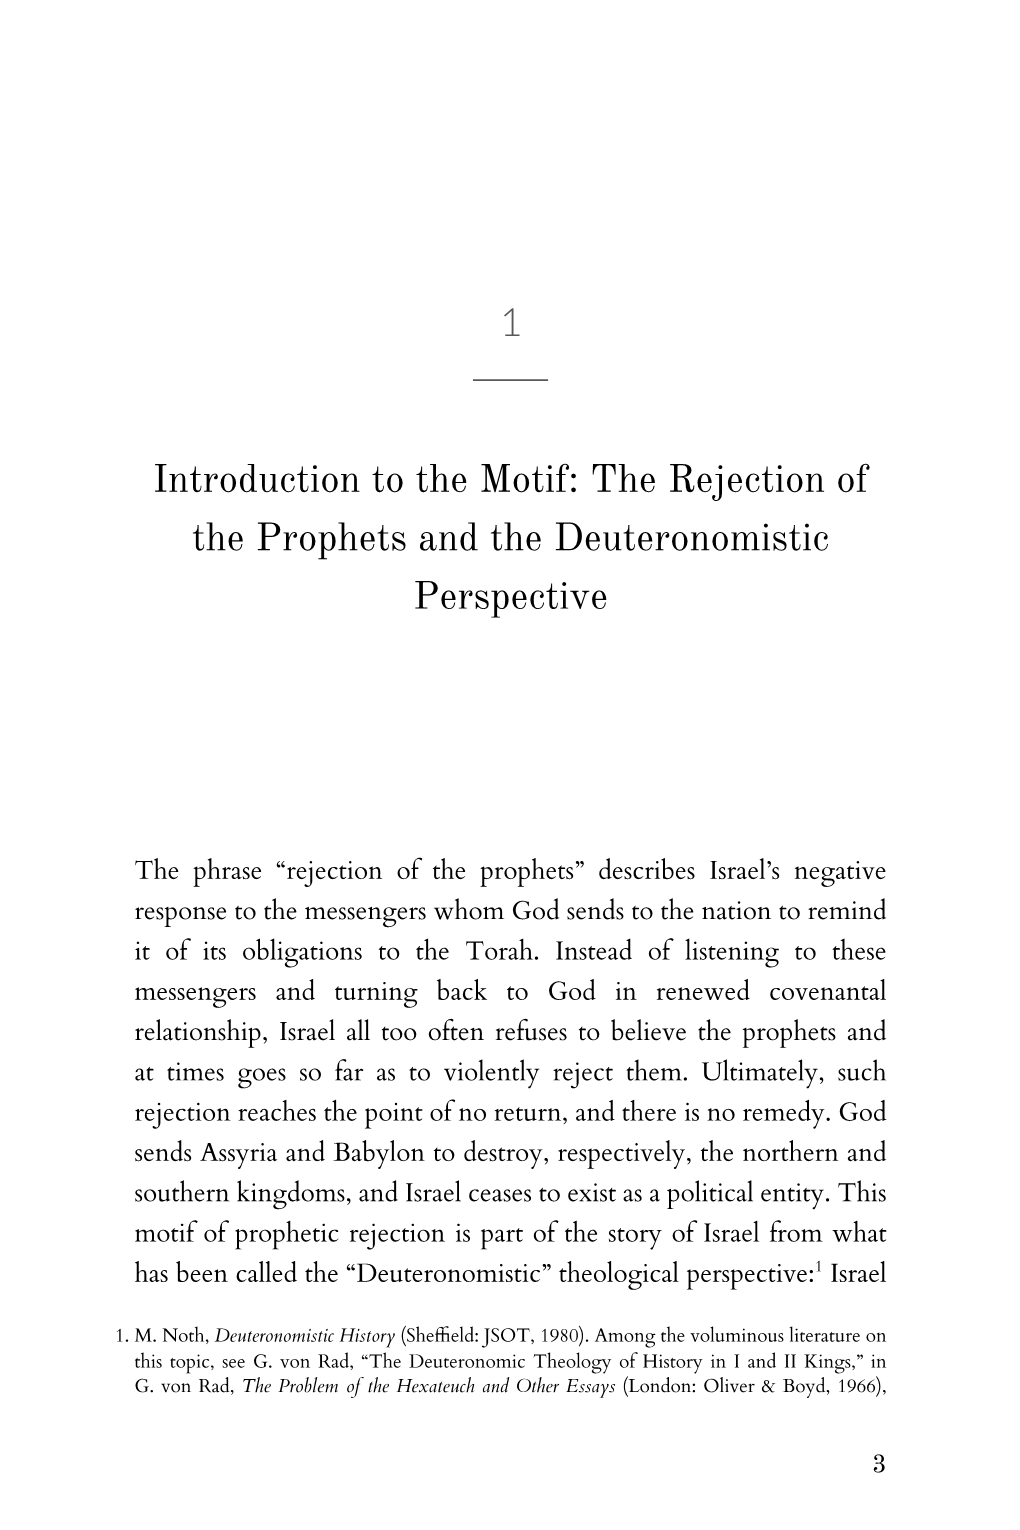 Introduction to the Motif: the Rejection of the Prophets and the Deuteronomistic Perspective